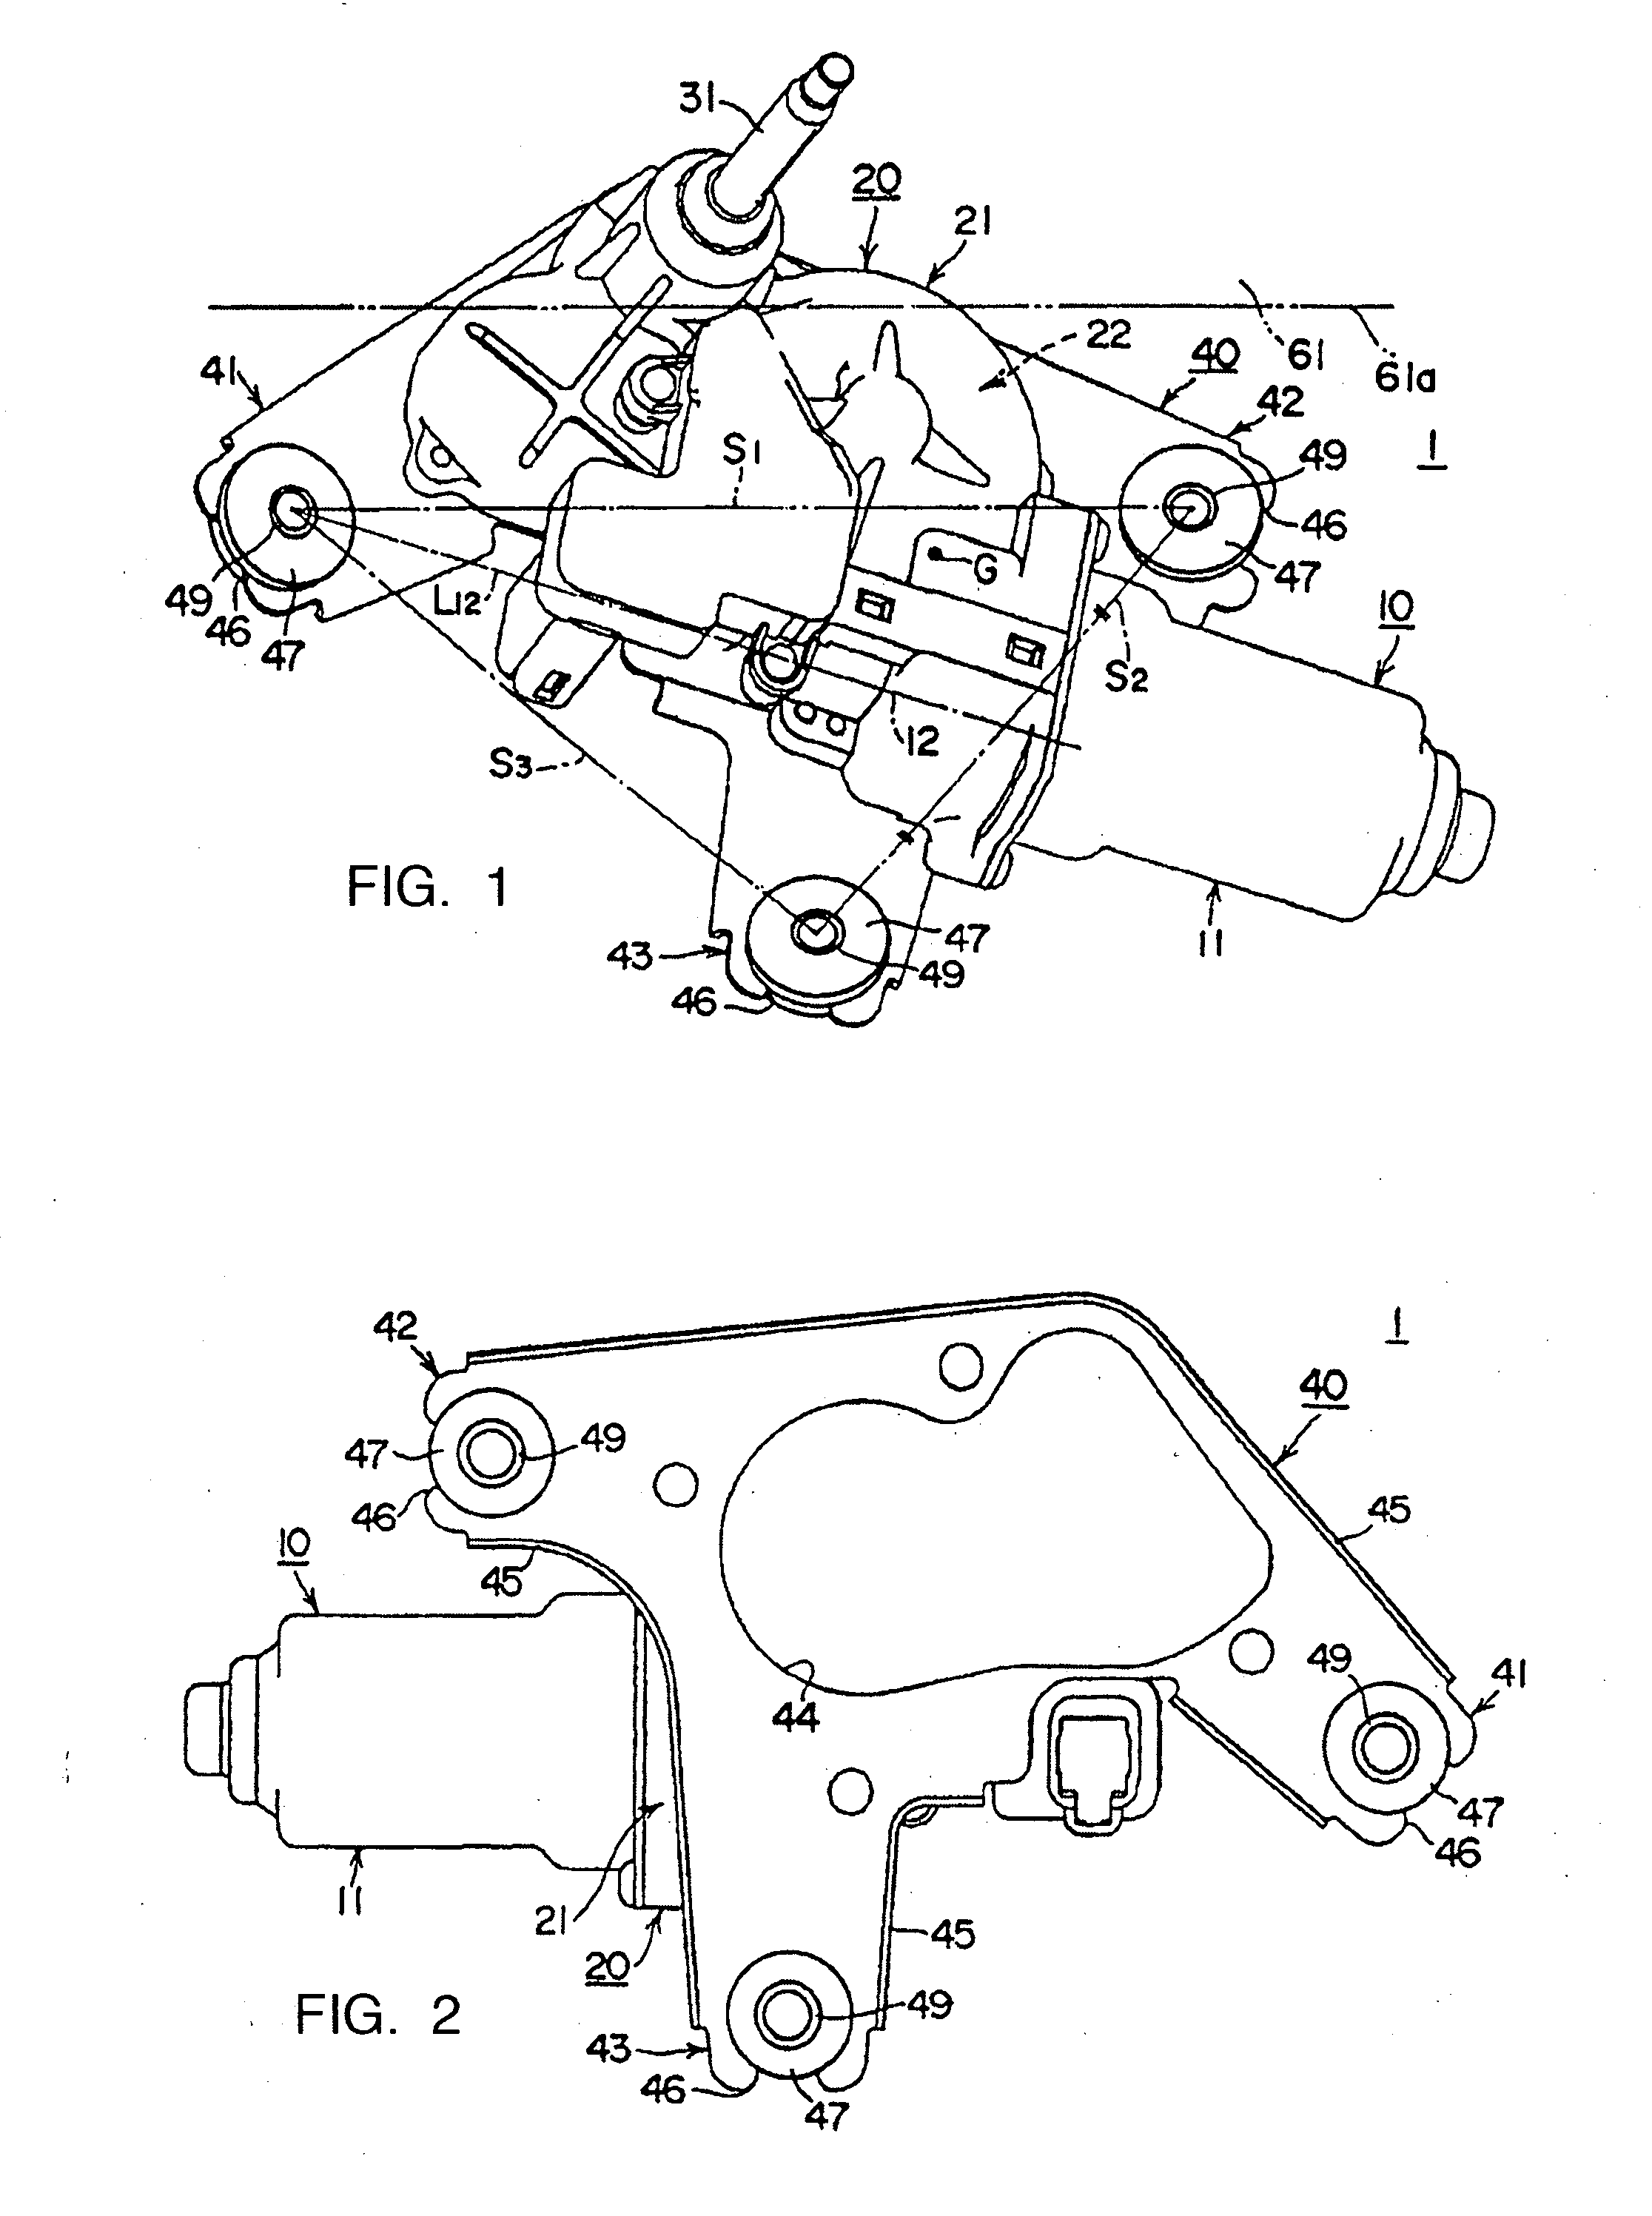 Motor with reduction gear